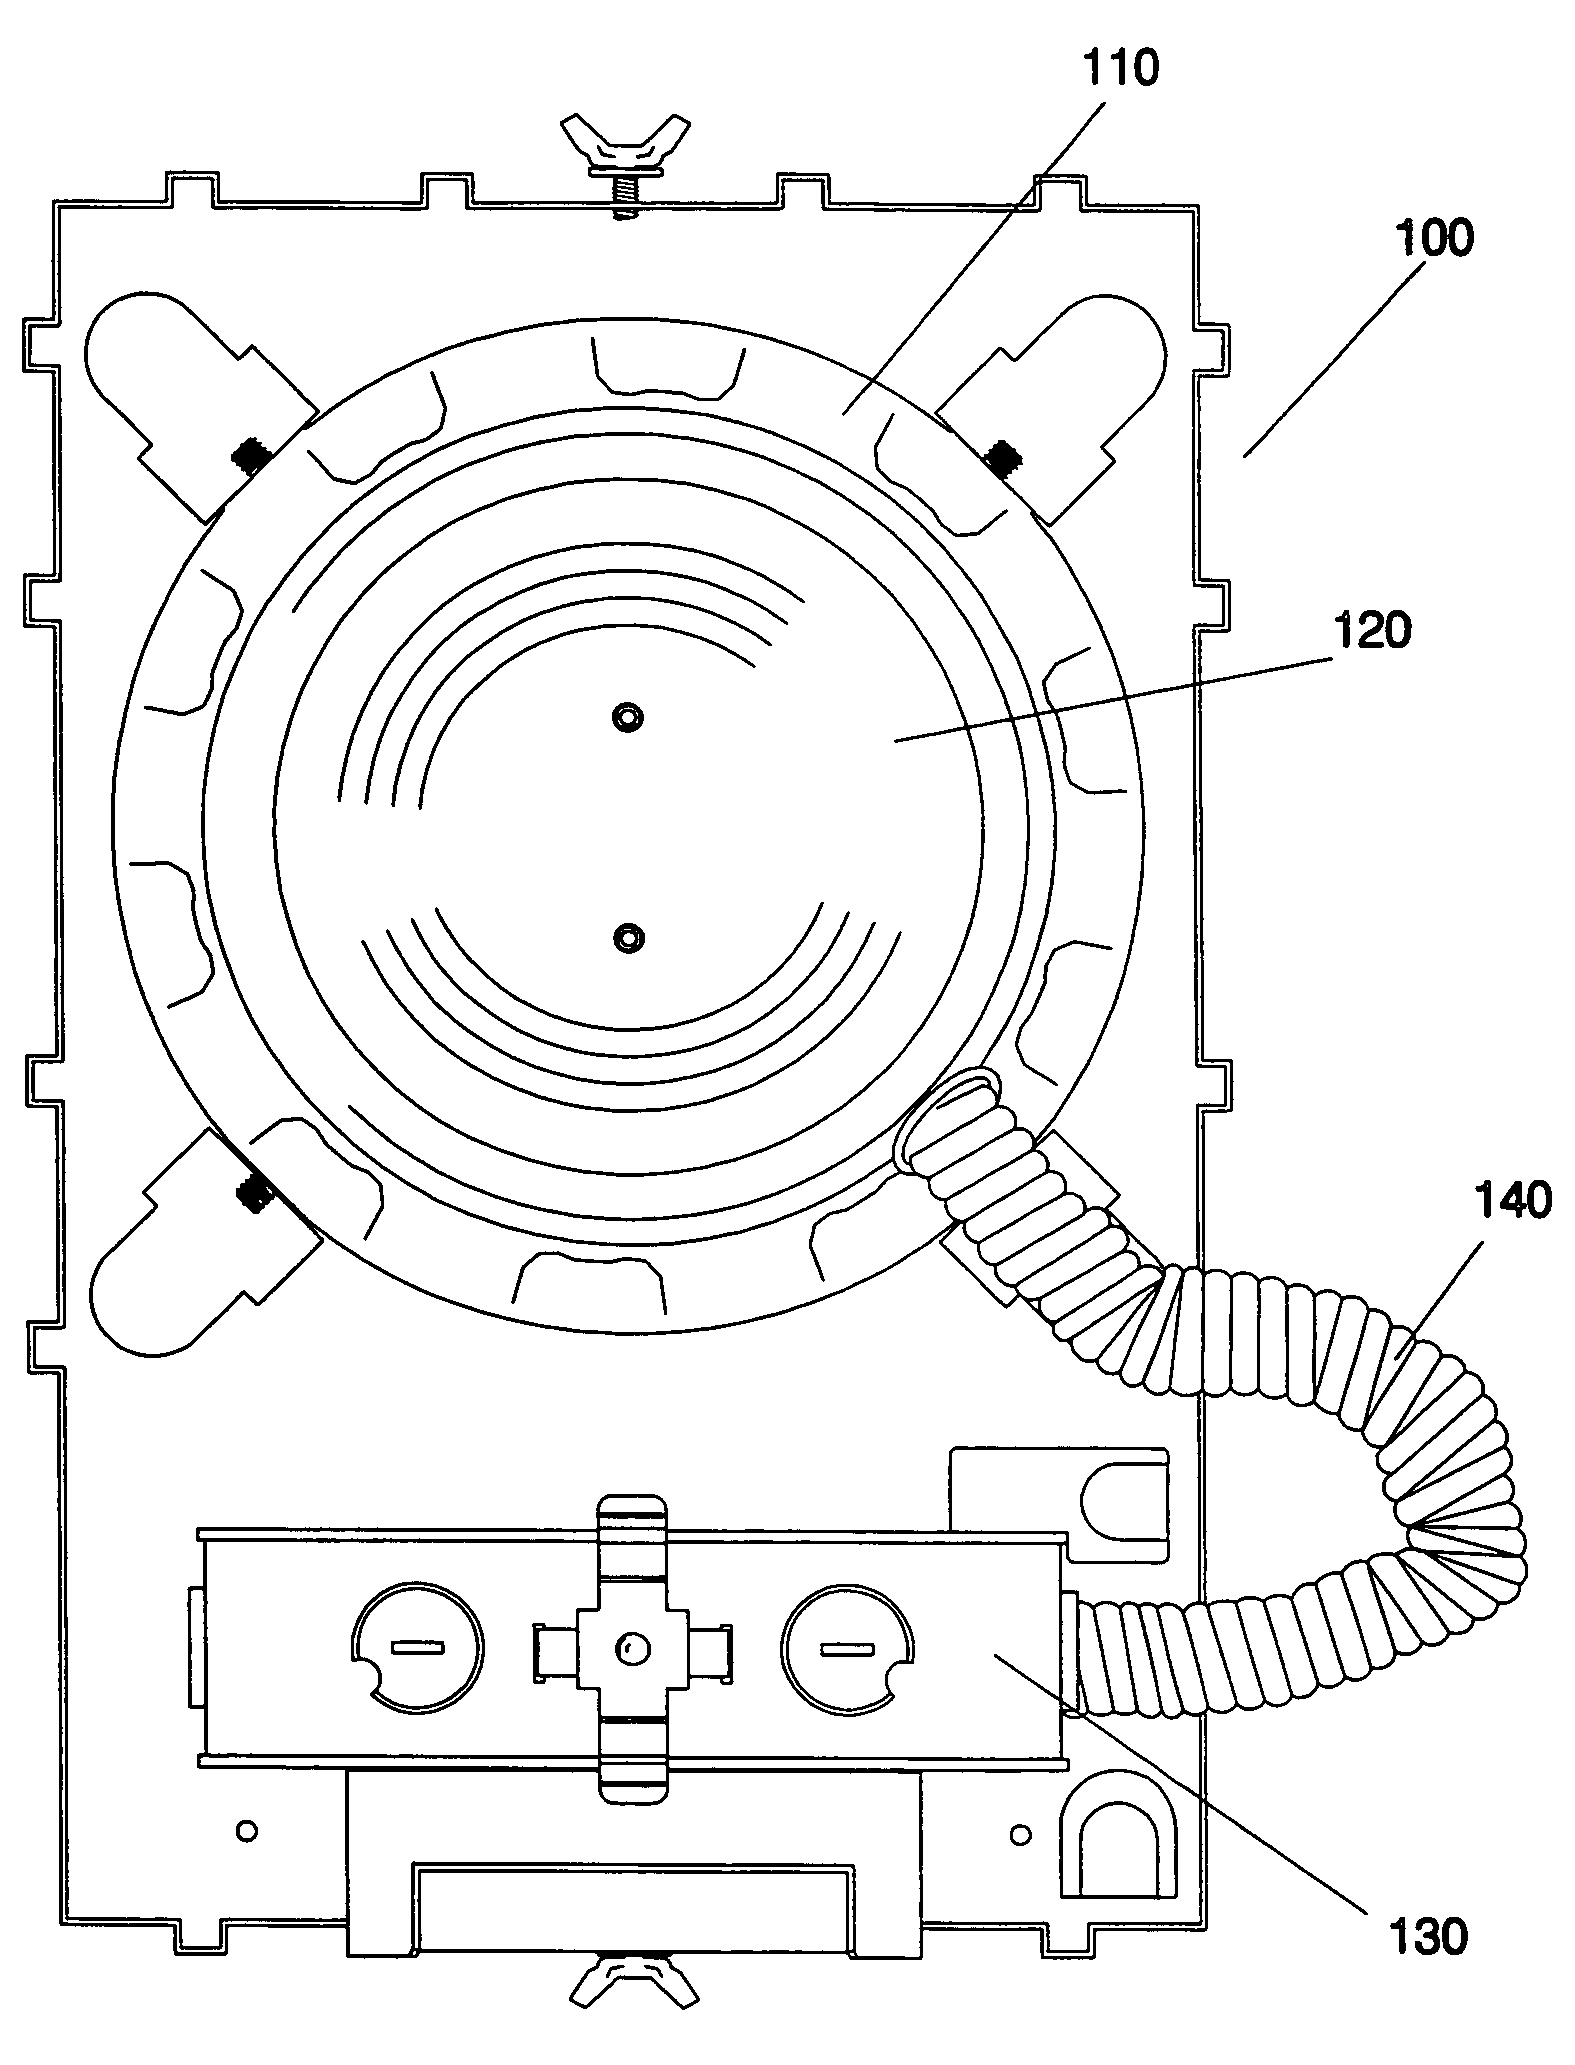 Apparatus to rapidly insert a socket assembly into a ceiling fixture